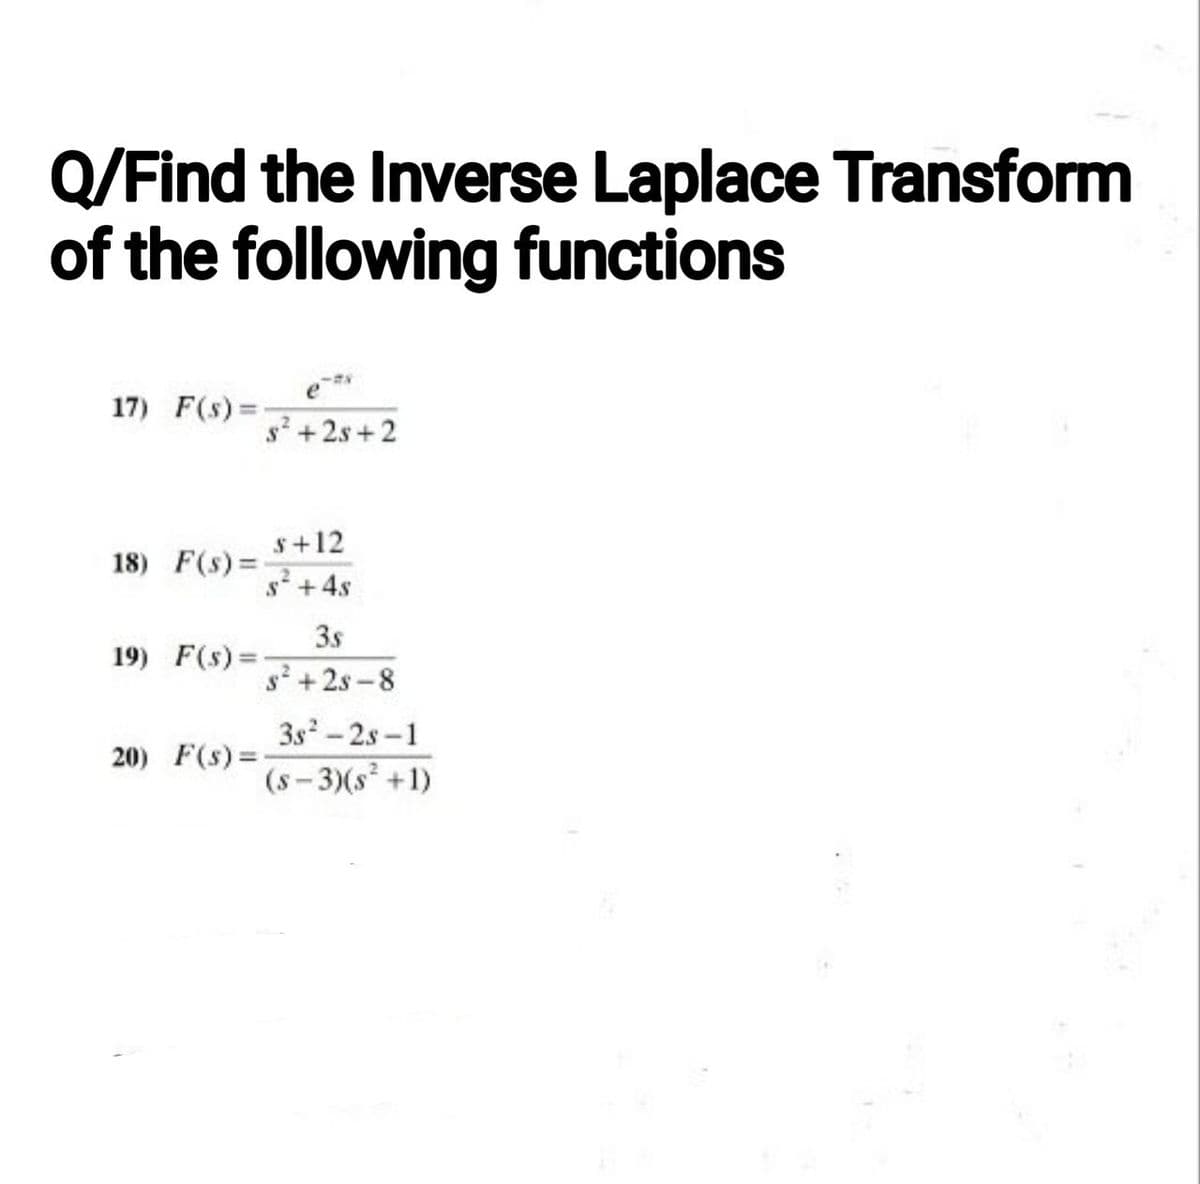 Q/Find the Inverse Laplace Transform
of the following functions
17) F(s)=
18) F(s)=
19) F(s)=
20) F(s) =
s²+2s+2
s +12
s² + 4s
3.s
s²+28-8
38²-28-1
(s-3)(s² +1)